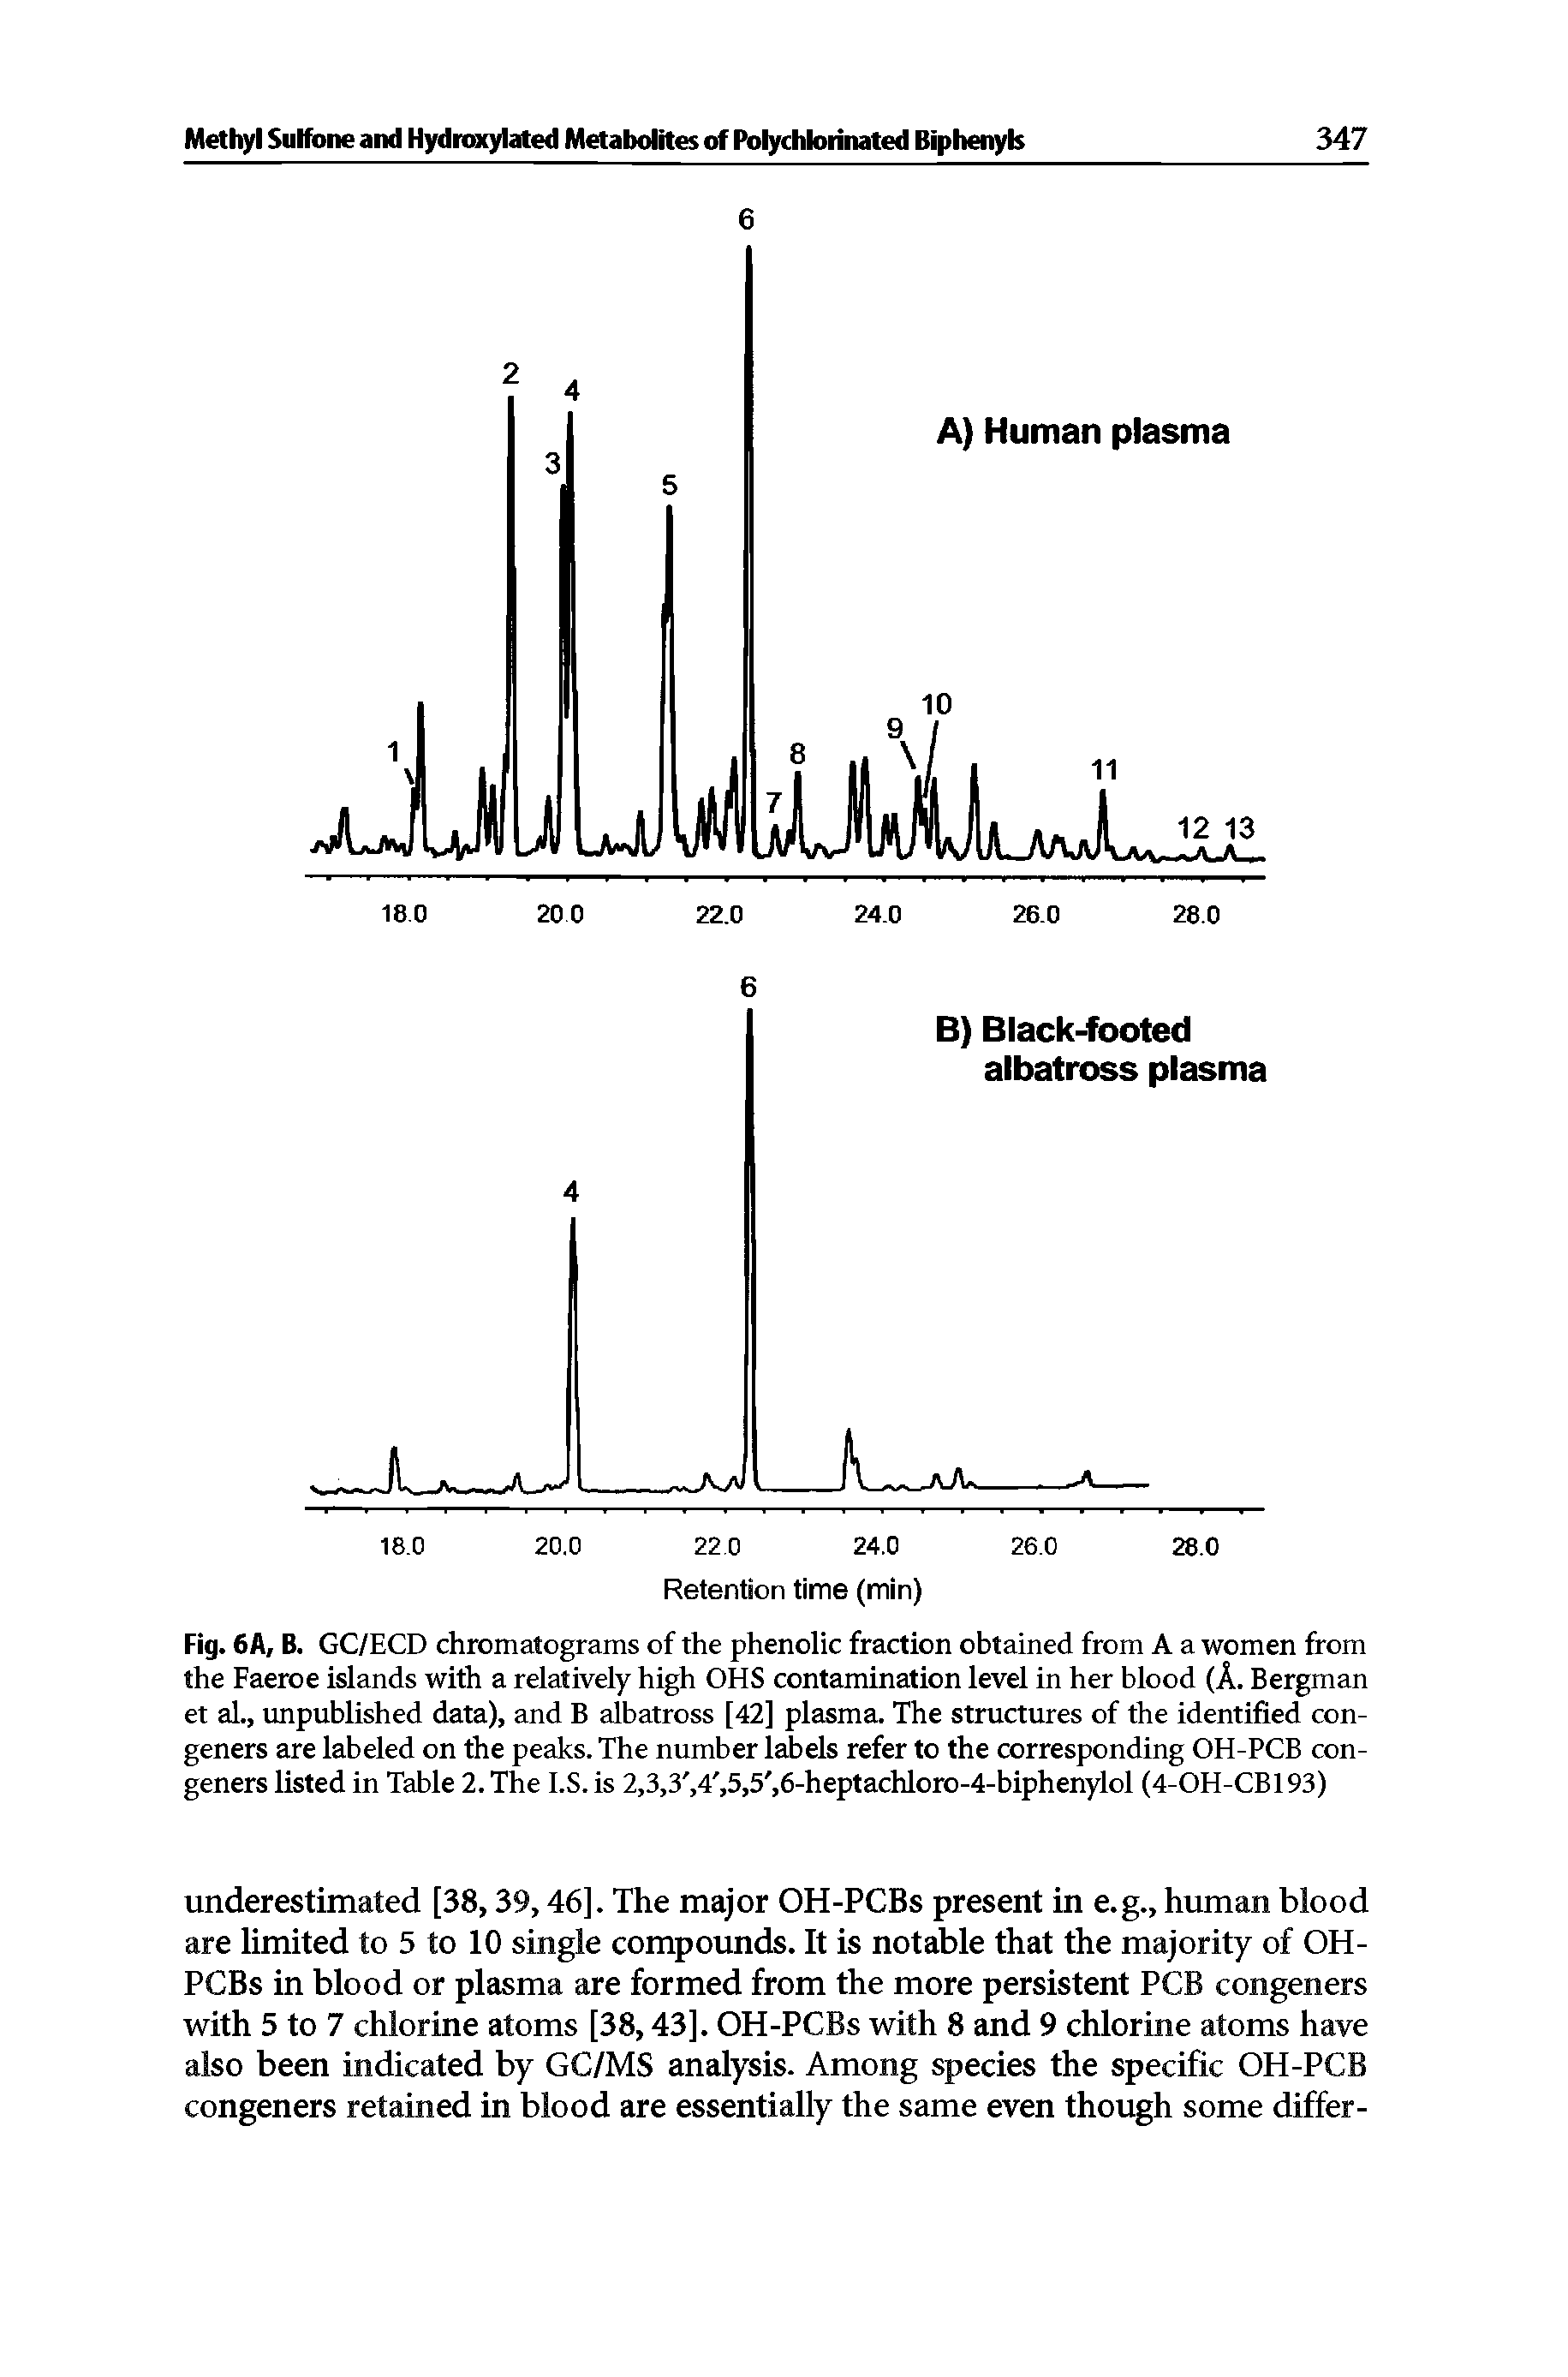 Fig. 6A, B. GC/ECD chromatograms of the phenolic fraction obtained from A a women from the Faeroe islands with a relatively high OHS contamination level in her blood (A. Bergman et al., unpublished data), and B albatross [42] plasma. The structures of the identified congeners are labeled on the peaks. The number labels refer to the corresponding OH-PCB congeners listed in Table 2. The I.S. is 2,3,3, 4, 5,5, 6-heptachloro-4-biphenylol (4-OH-CB193)...